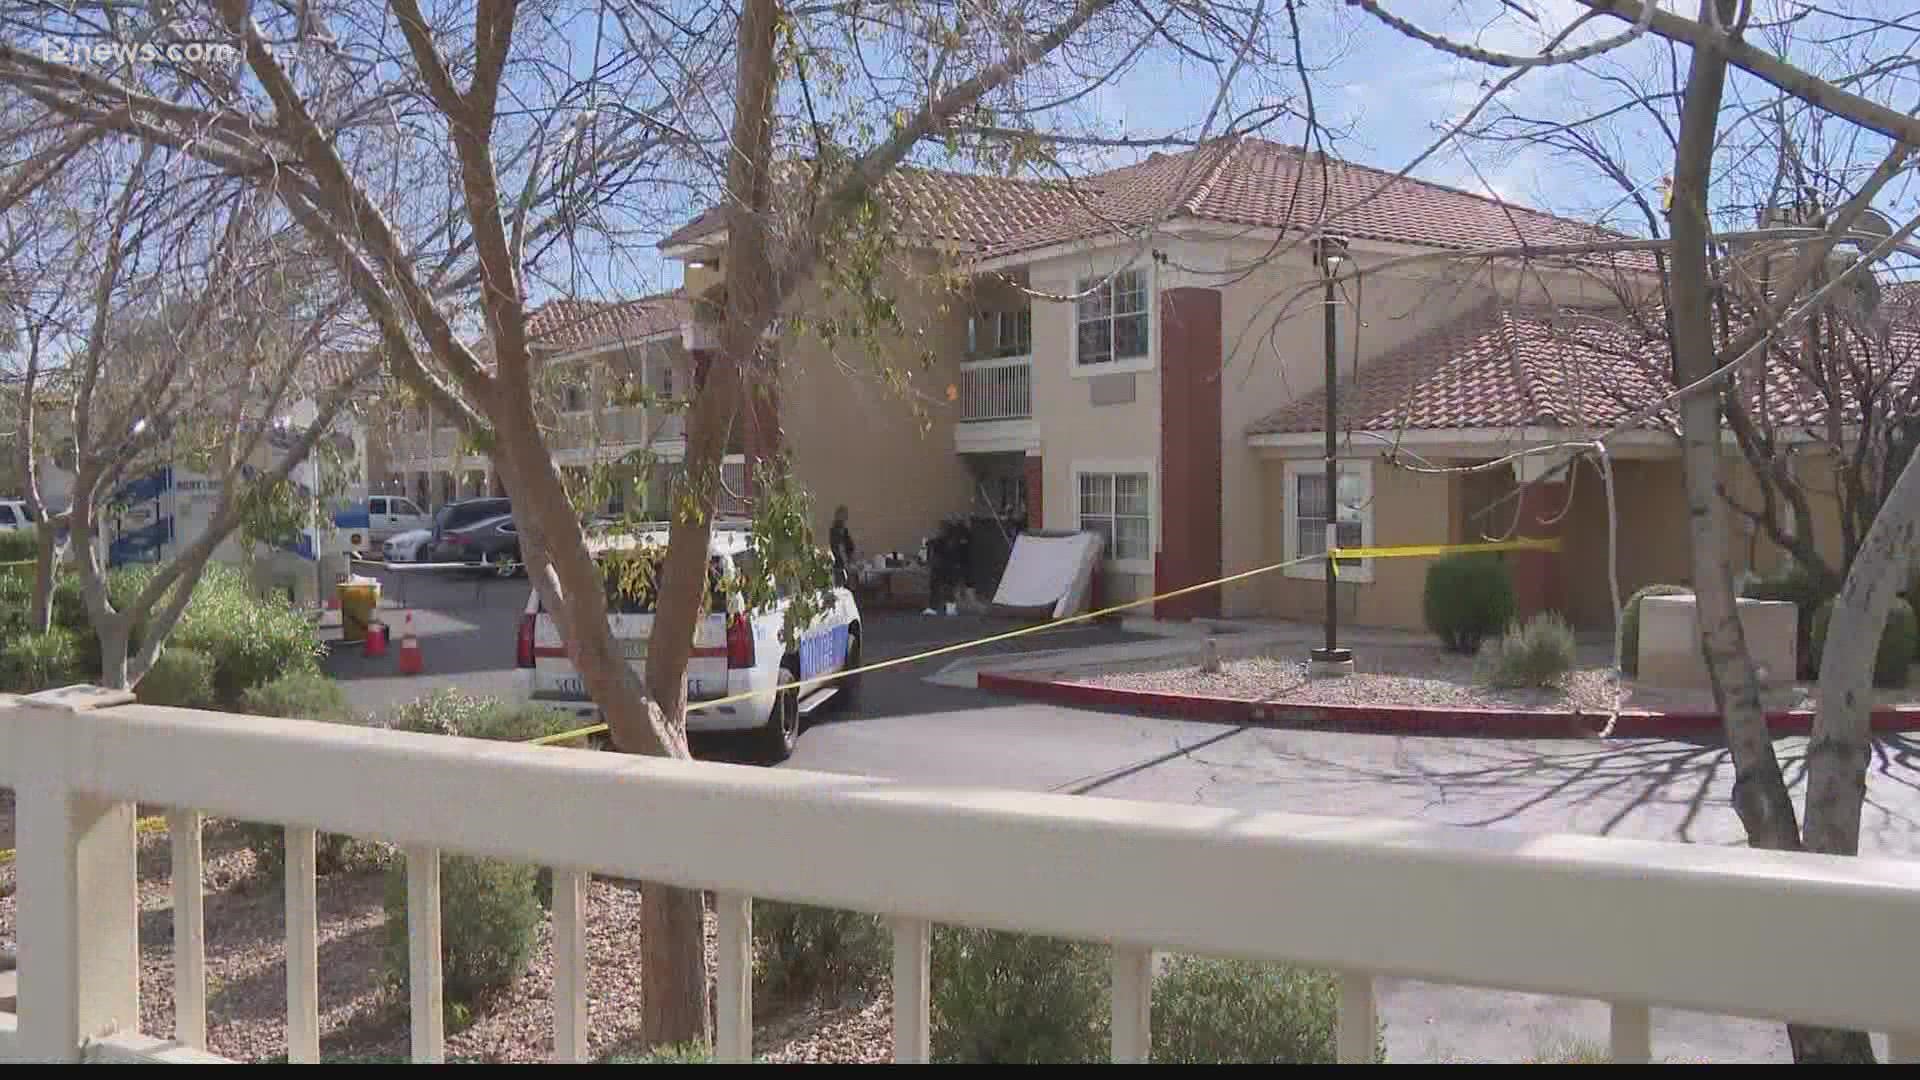 DCS says it investigated three reports of abuse against the grandma accused of killing her 11-year-old grandson at Scottsdale hotel.